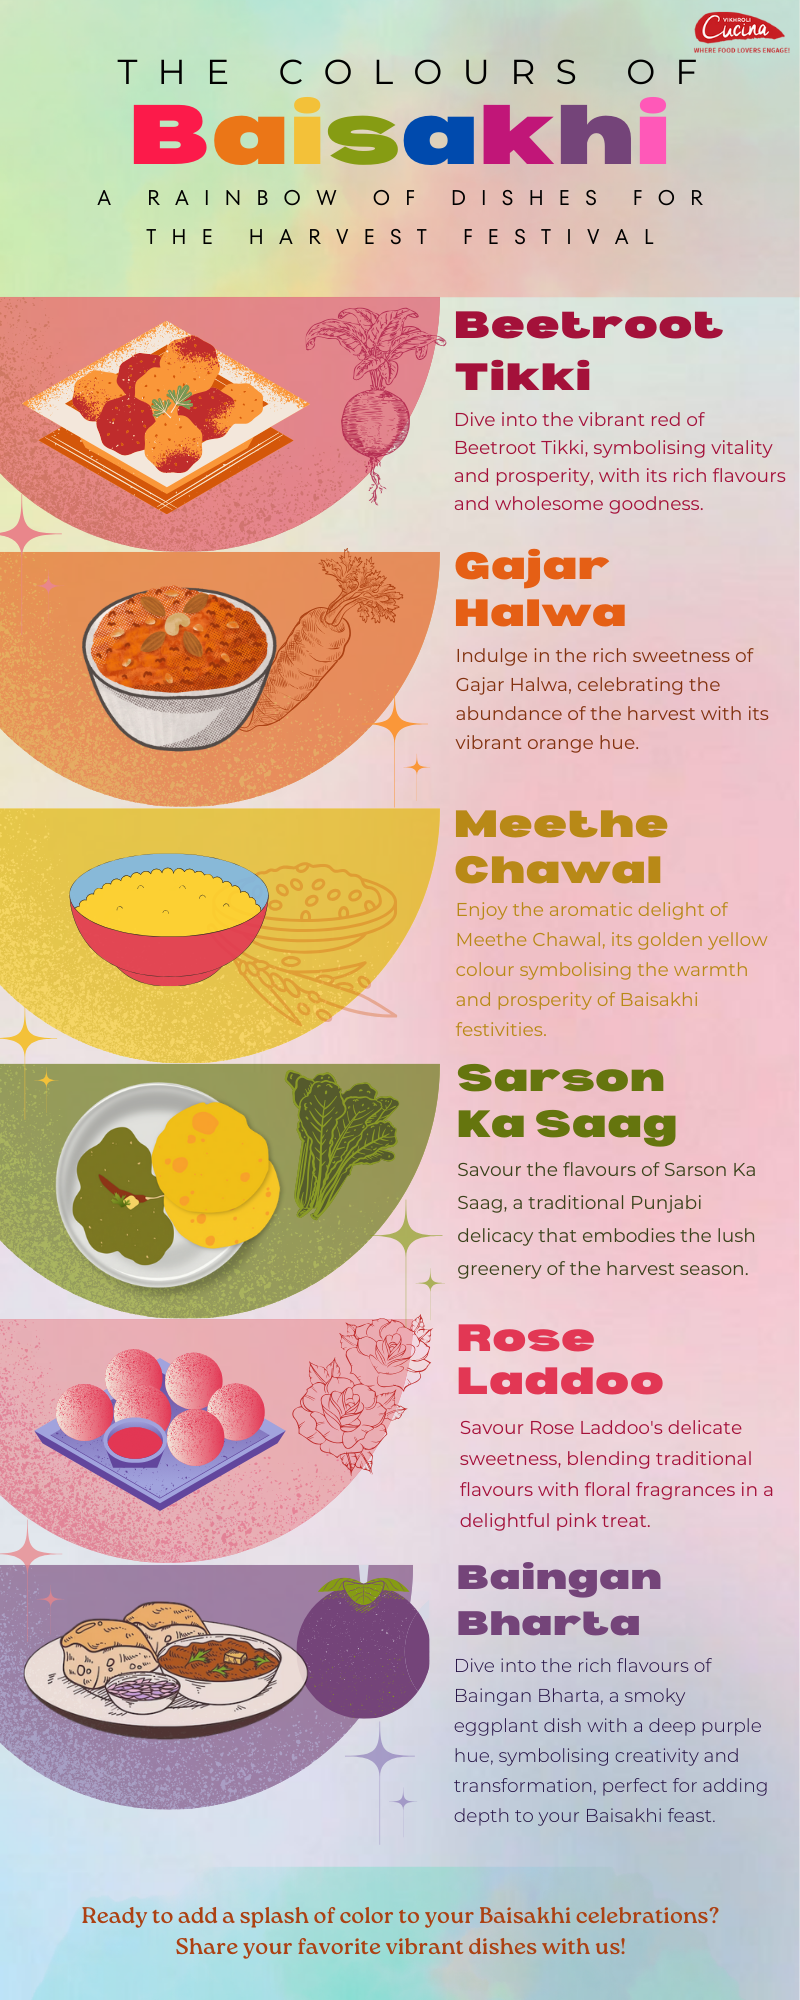 The Delights of Baisakhi Dishes